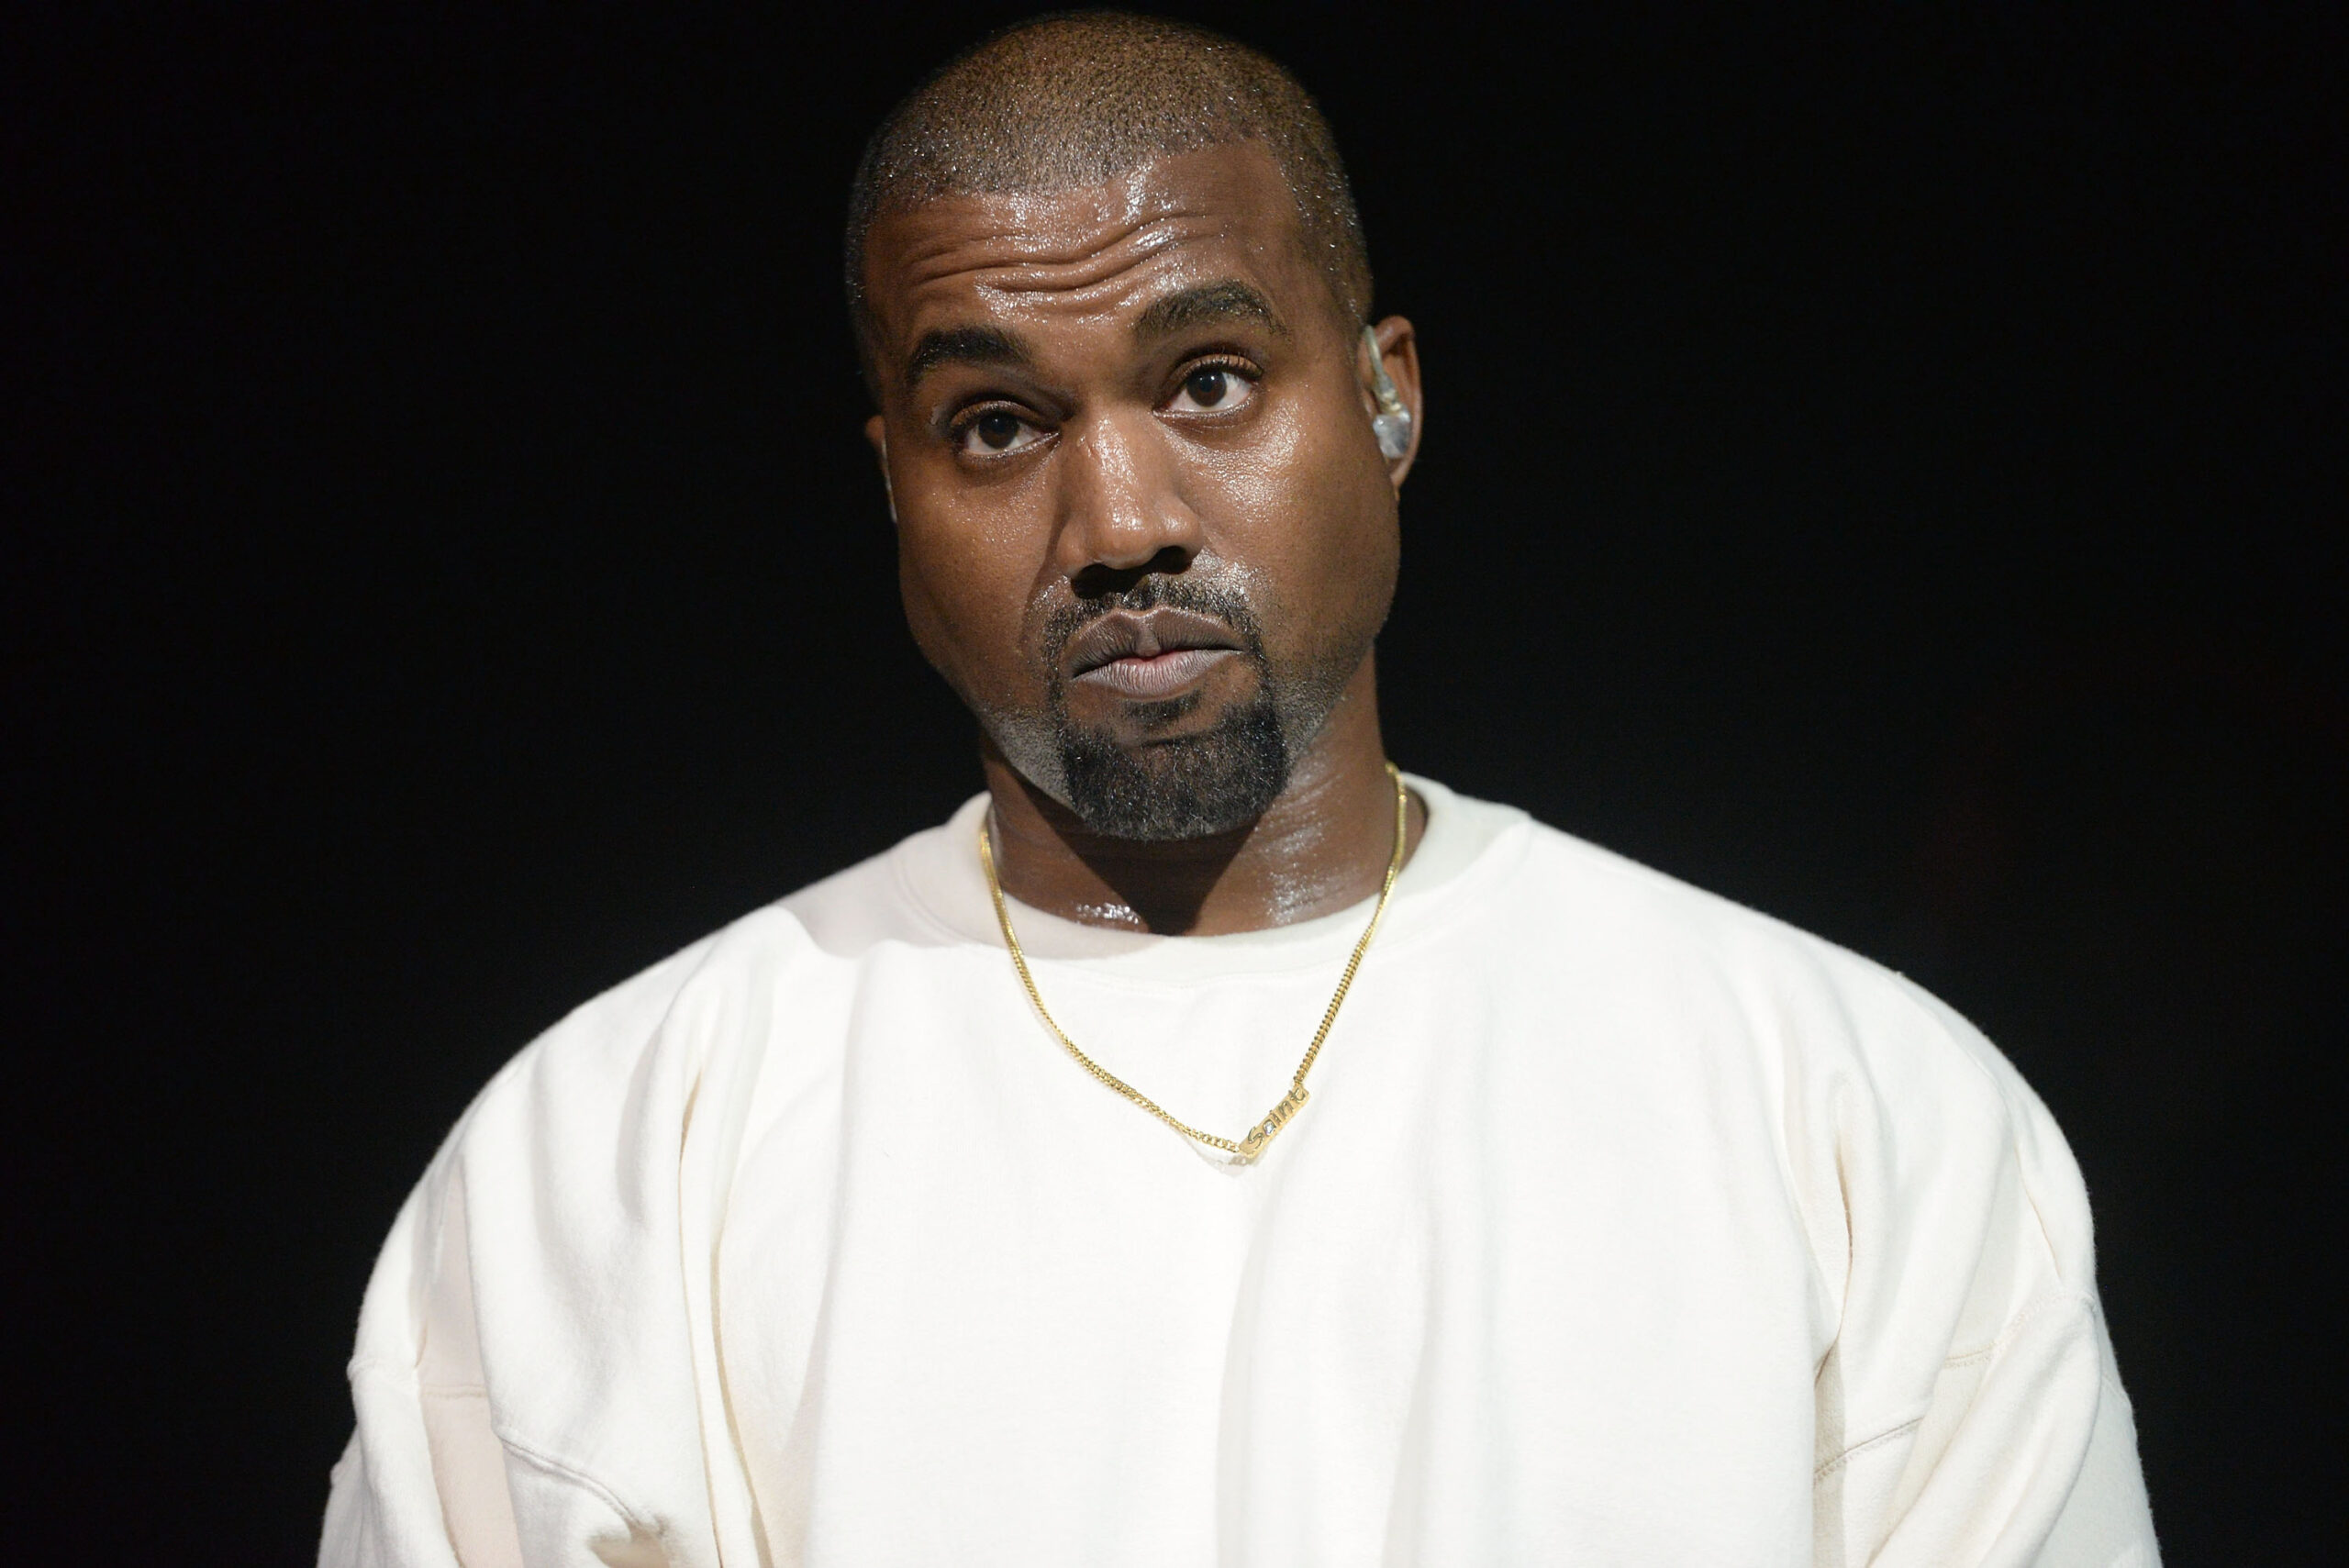 Kanye West’s Face Mask Is “Breaking Italian Anti-Terror Laws”: Report